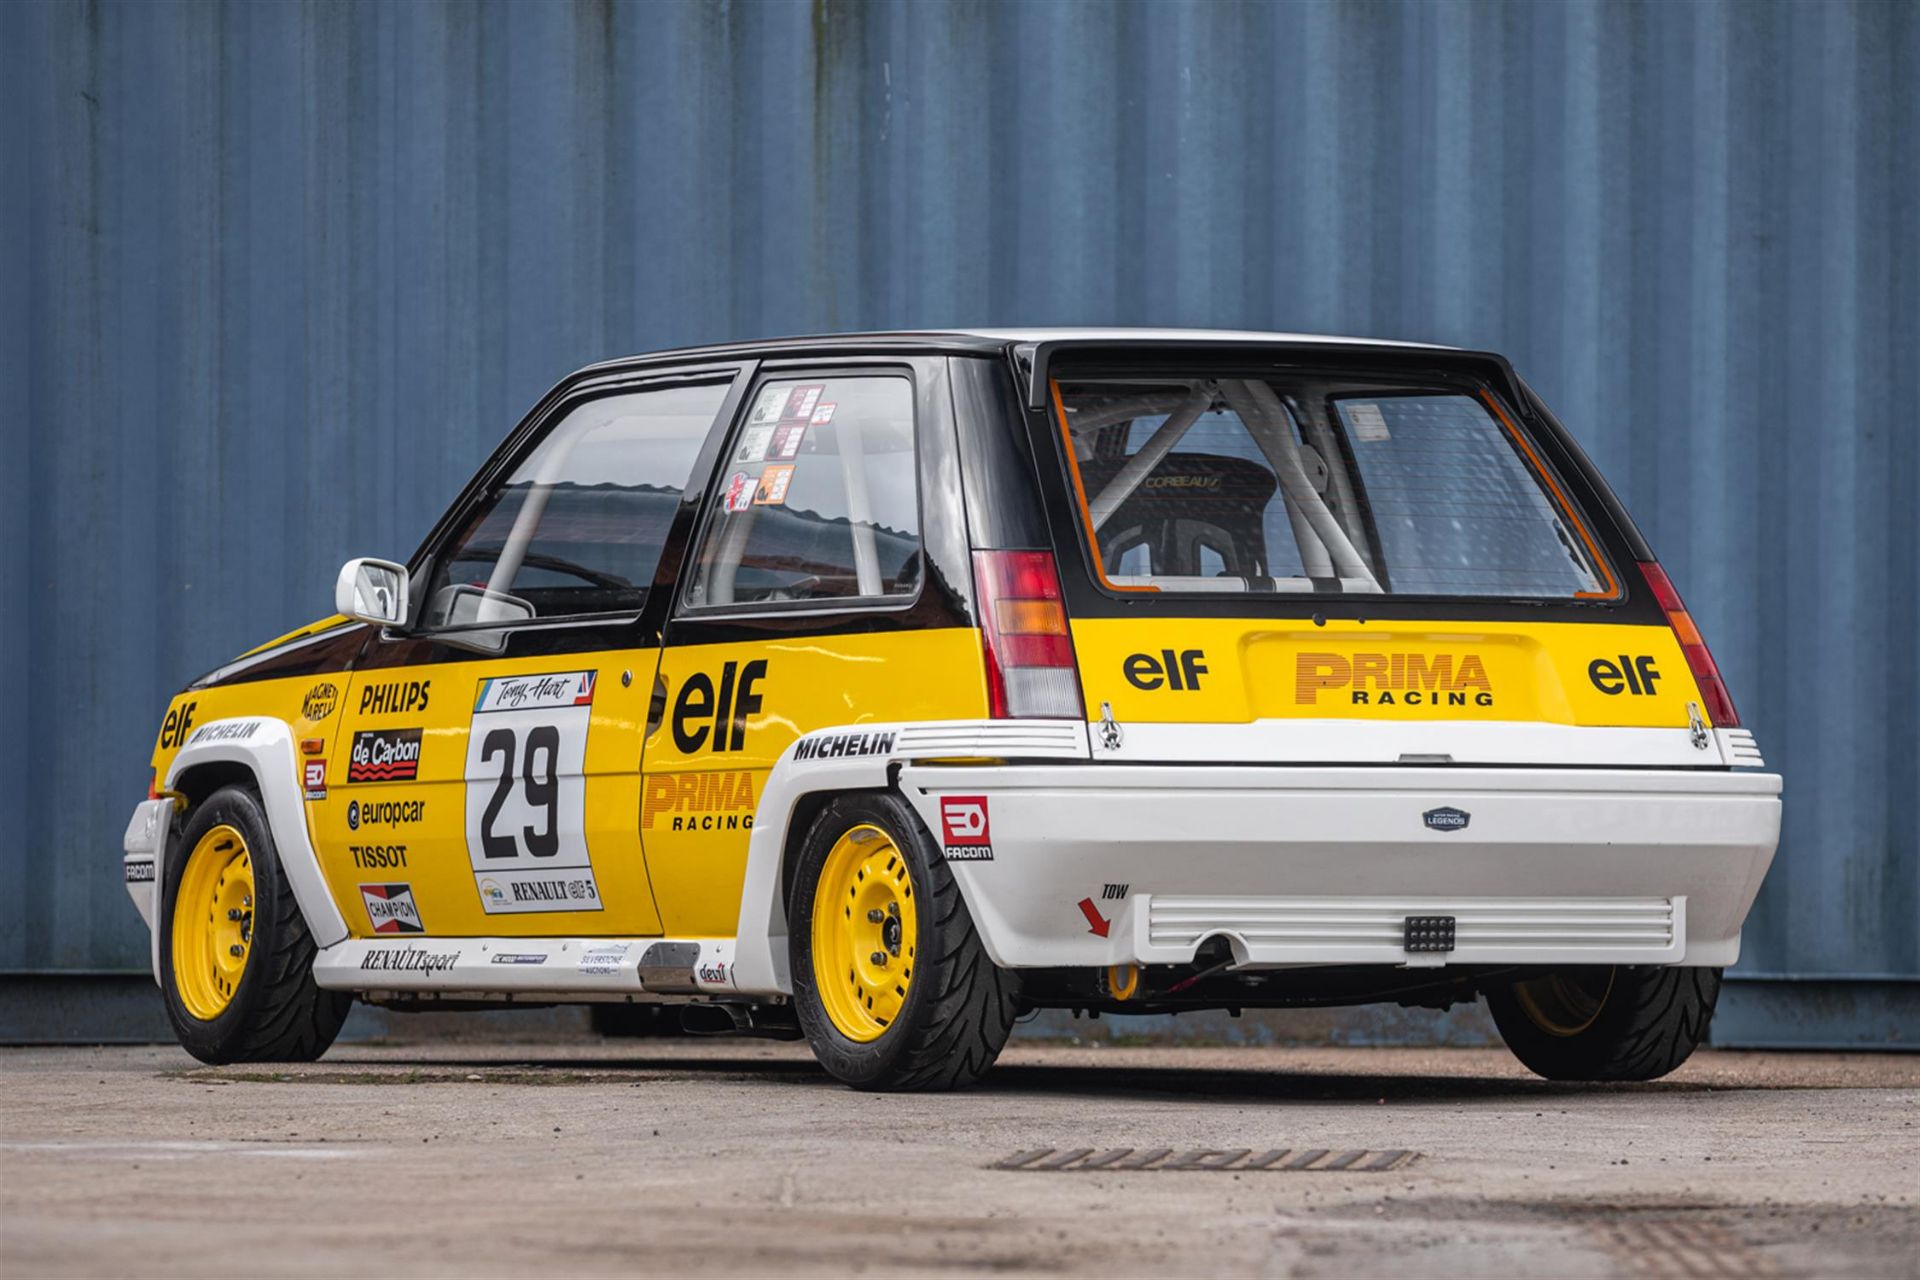 1986 Renault 5 GT Turbo Coupé Historic Touring Car - Image 4 of 10